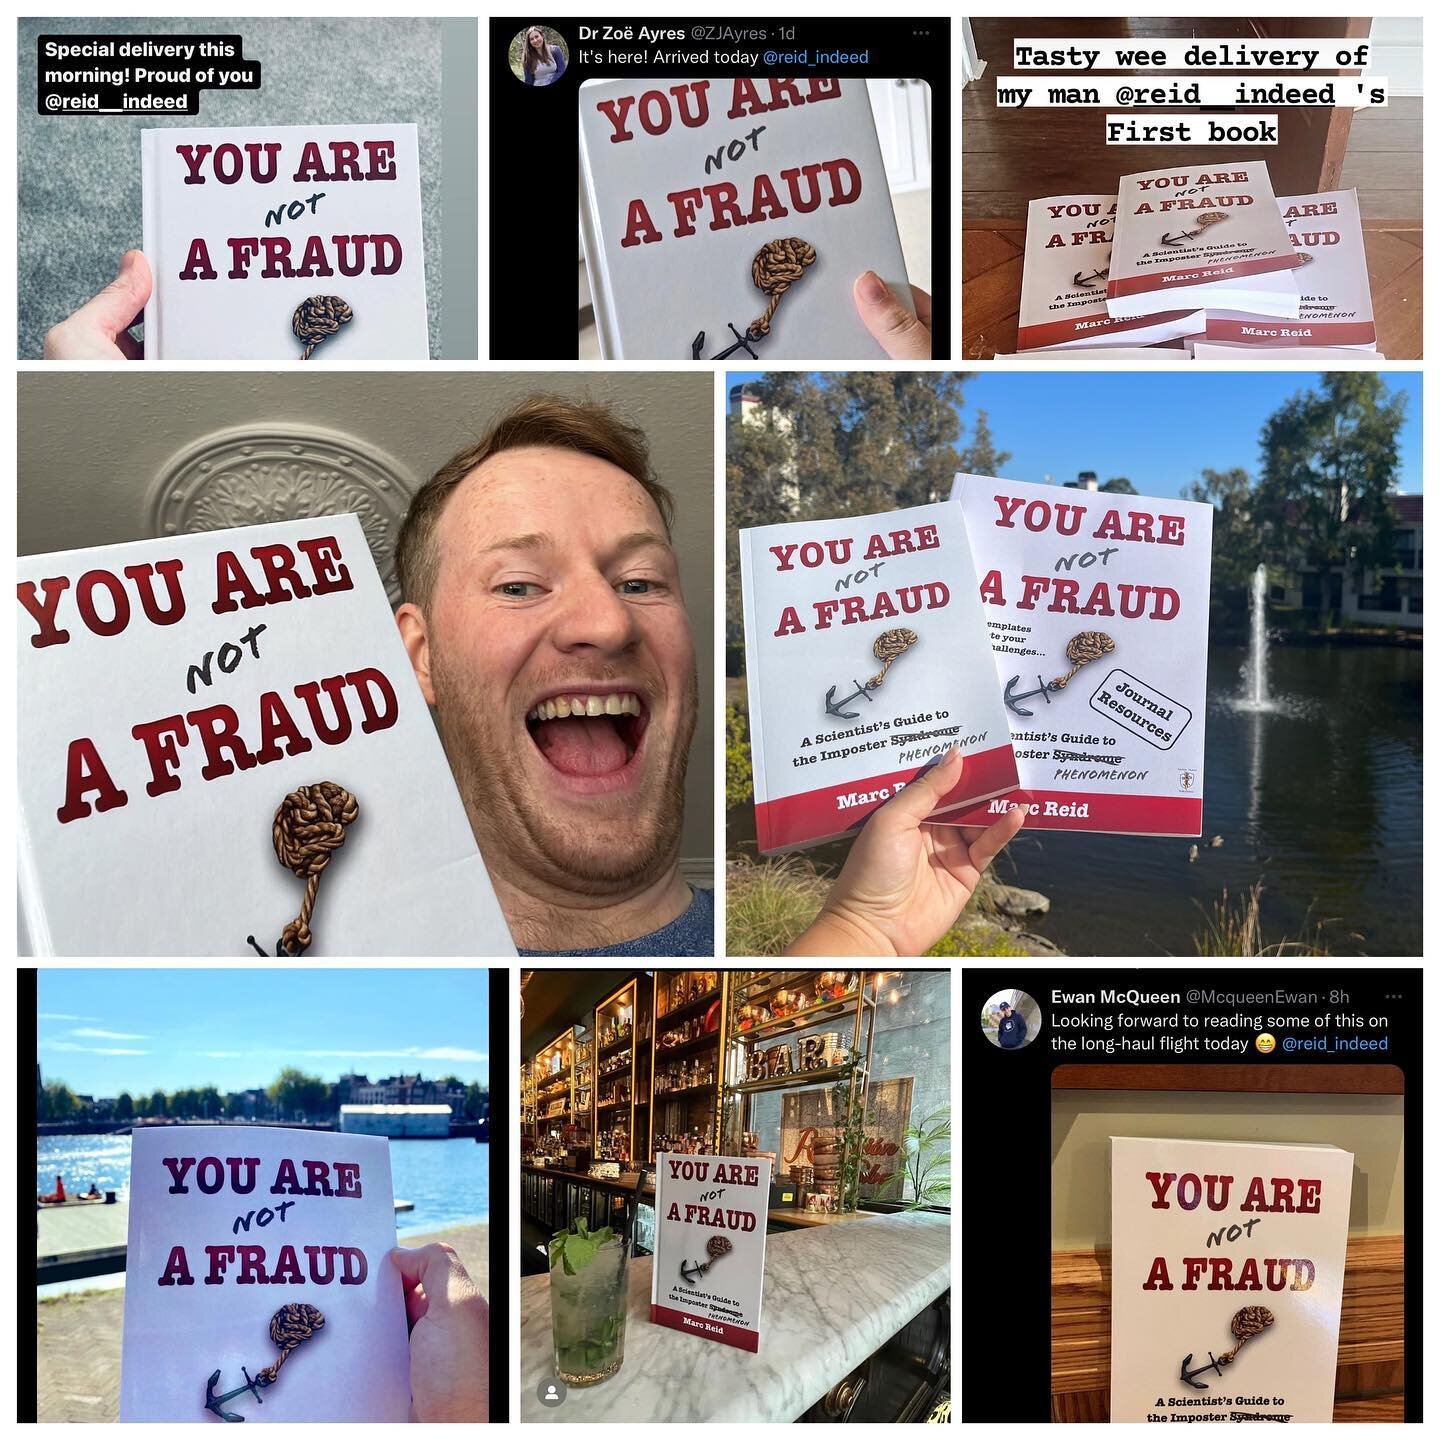 I&rsquo;m thoroughly thrilled to see some of the photos coming in for copies of #YouAreNotAFraud that have found their way to different parts of the world! 🙏🏻📖🙏🏻

So far: 🇬🇧, 🇩🇪, 🇦🇺 , 🇳🇱, 🇫🇷, 🇨🇦, 🇺🇸 

www.dr-marc-reid.com/notafraud